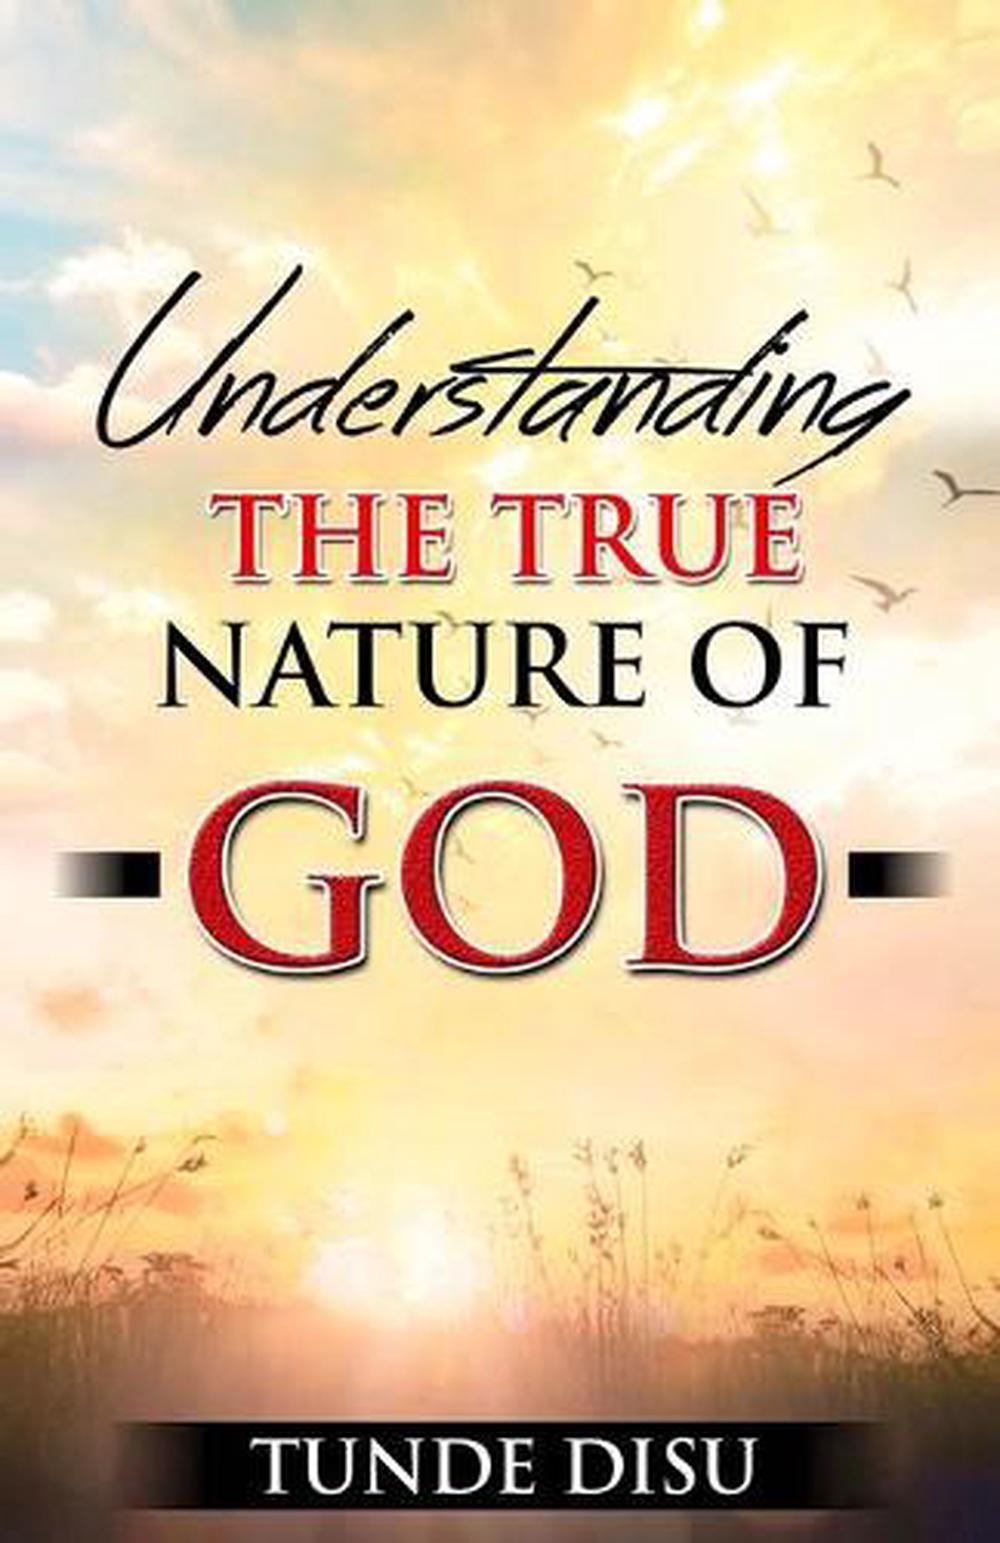 research papers on the nature of god